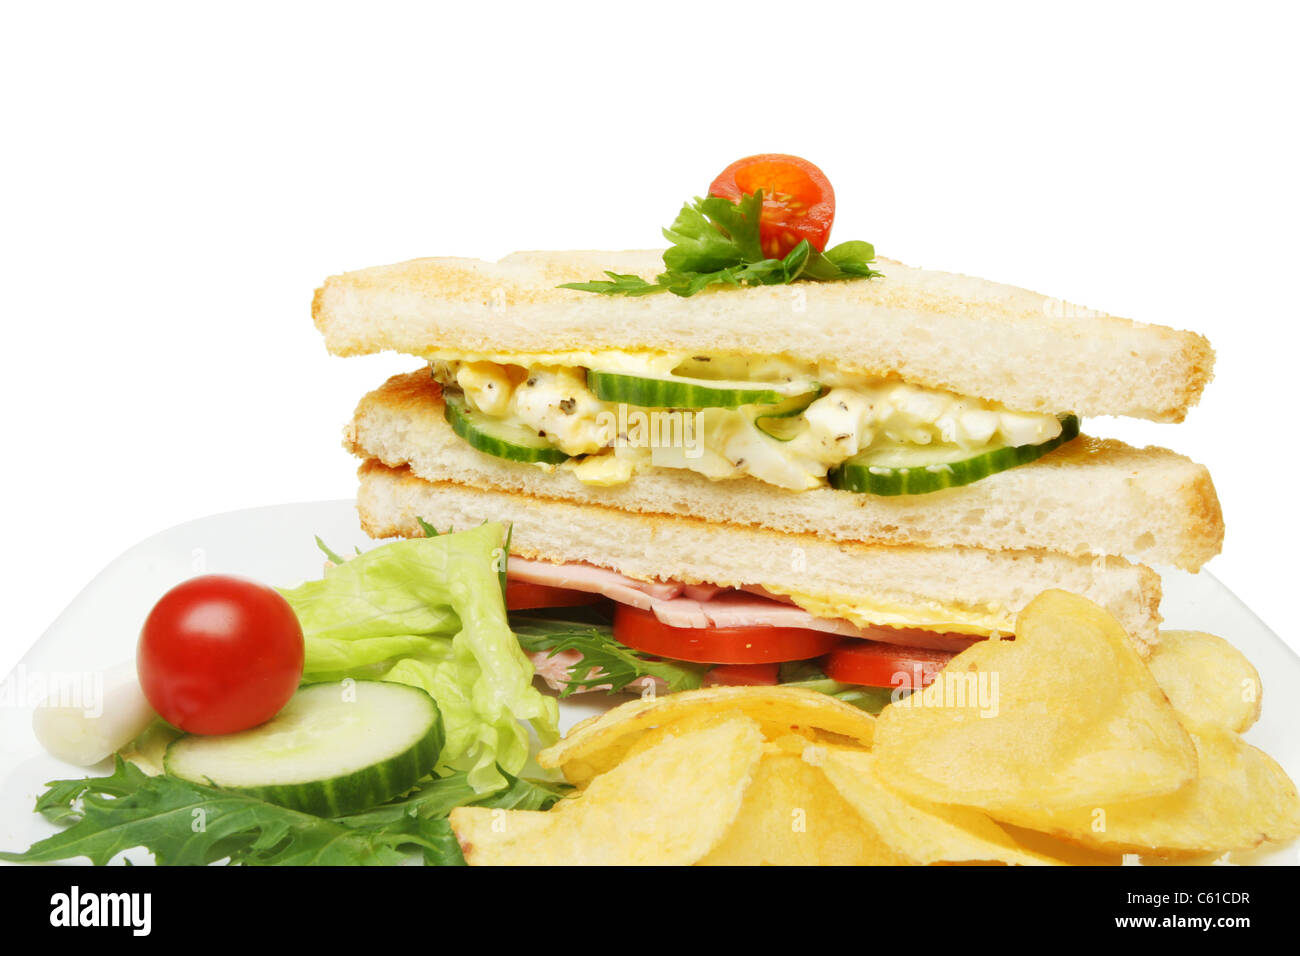 Closeup of a ham and egg club sandwich with garnish Stock Photo